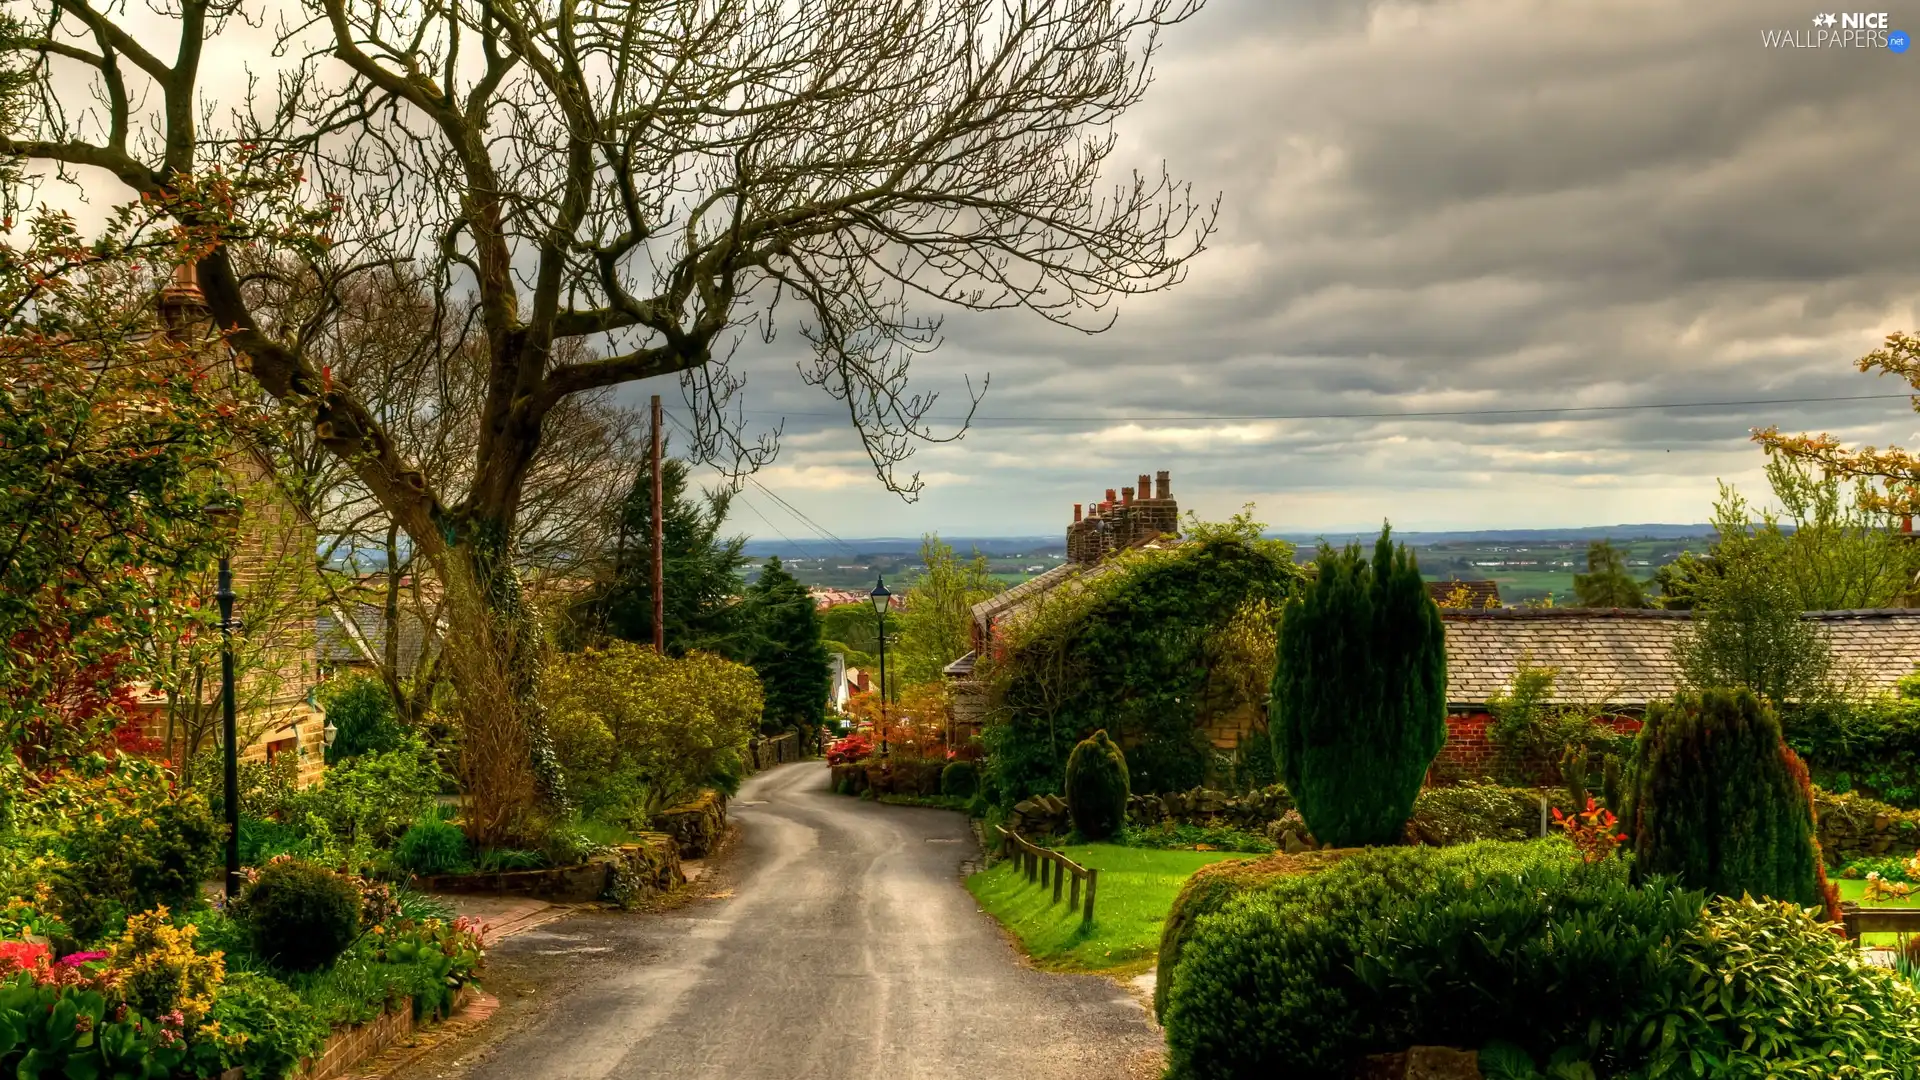 country, England, clouds, Houses, Way